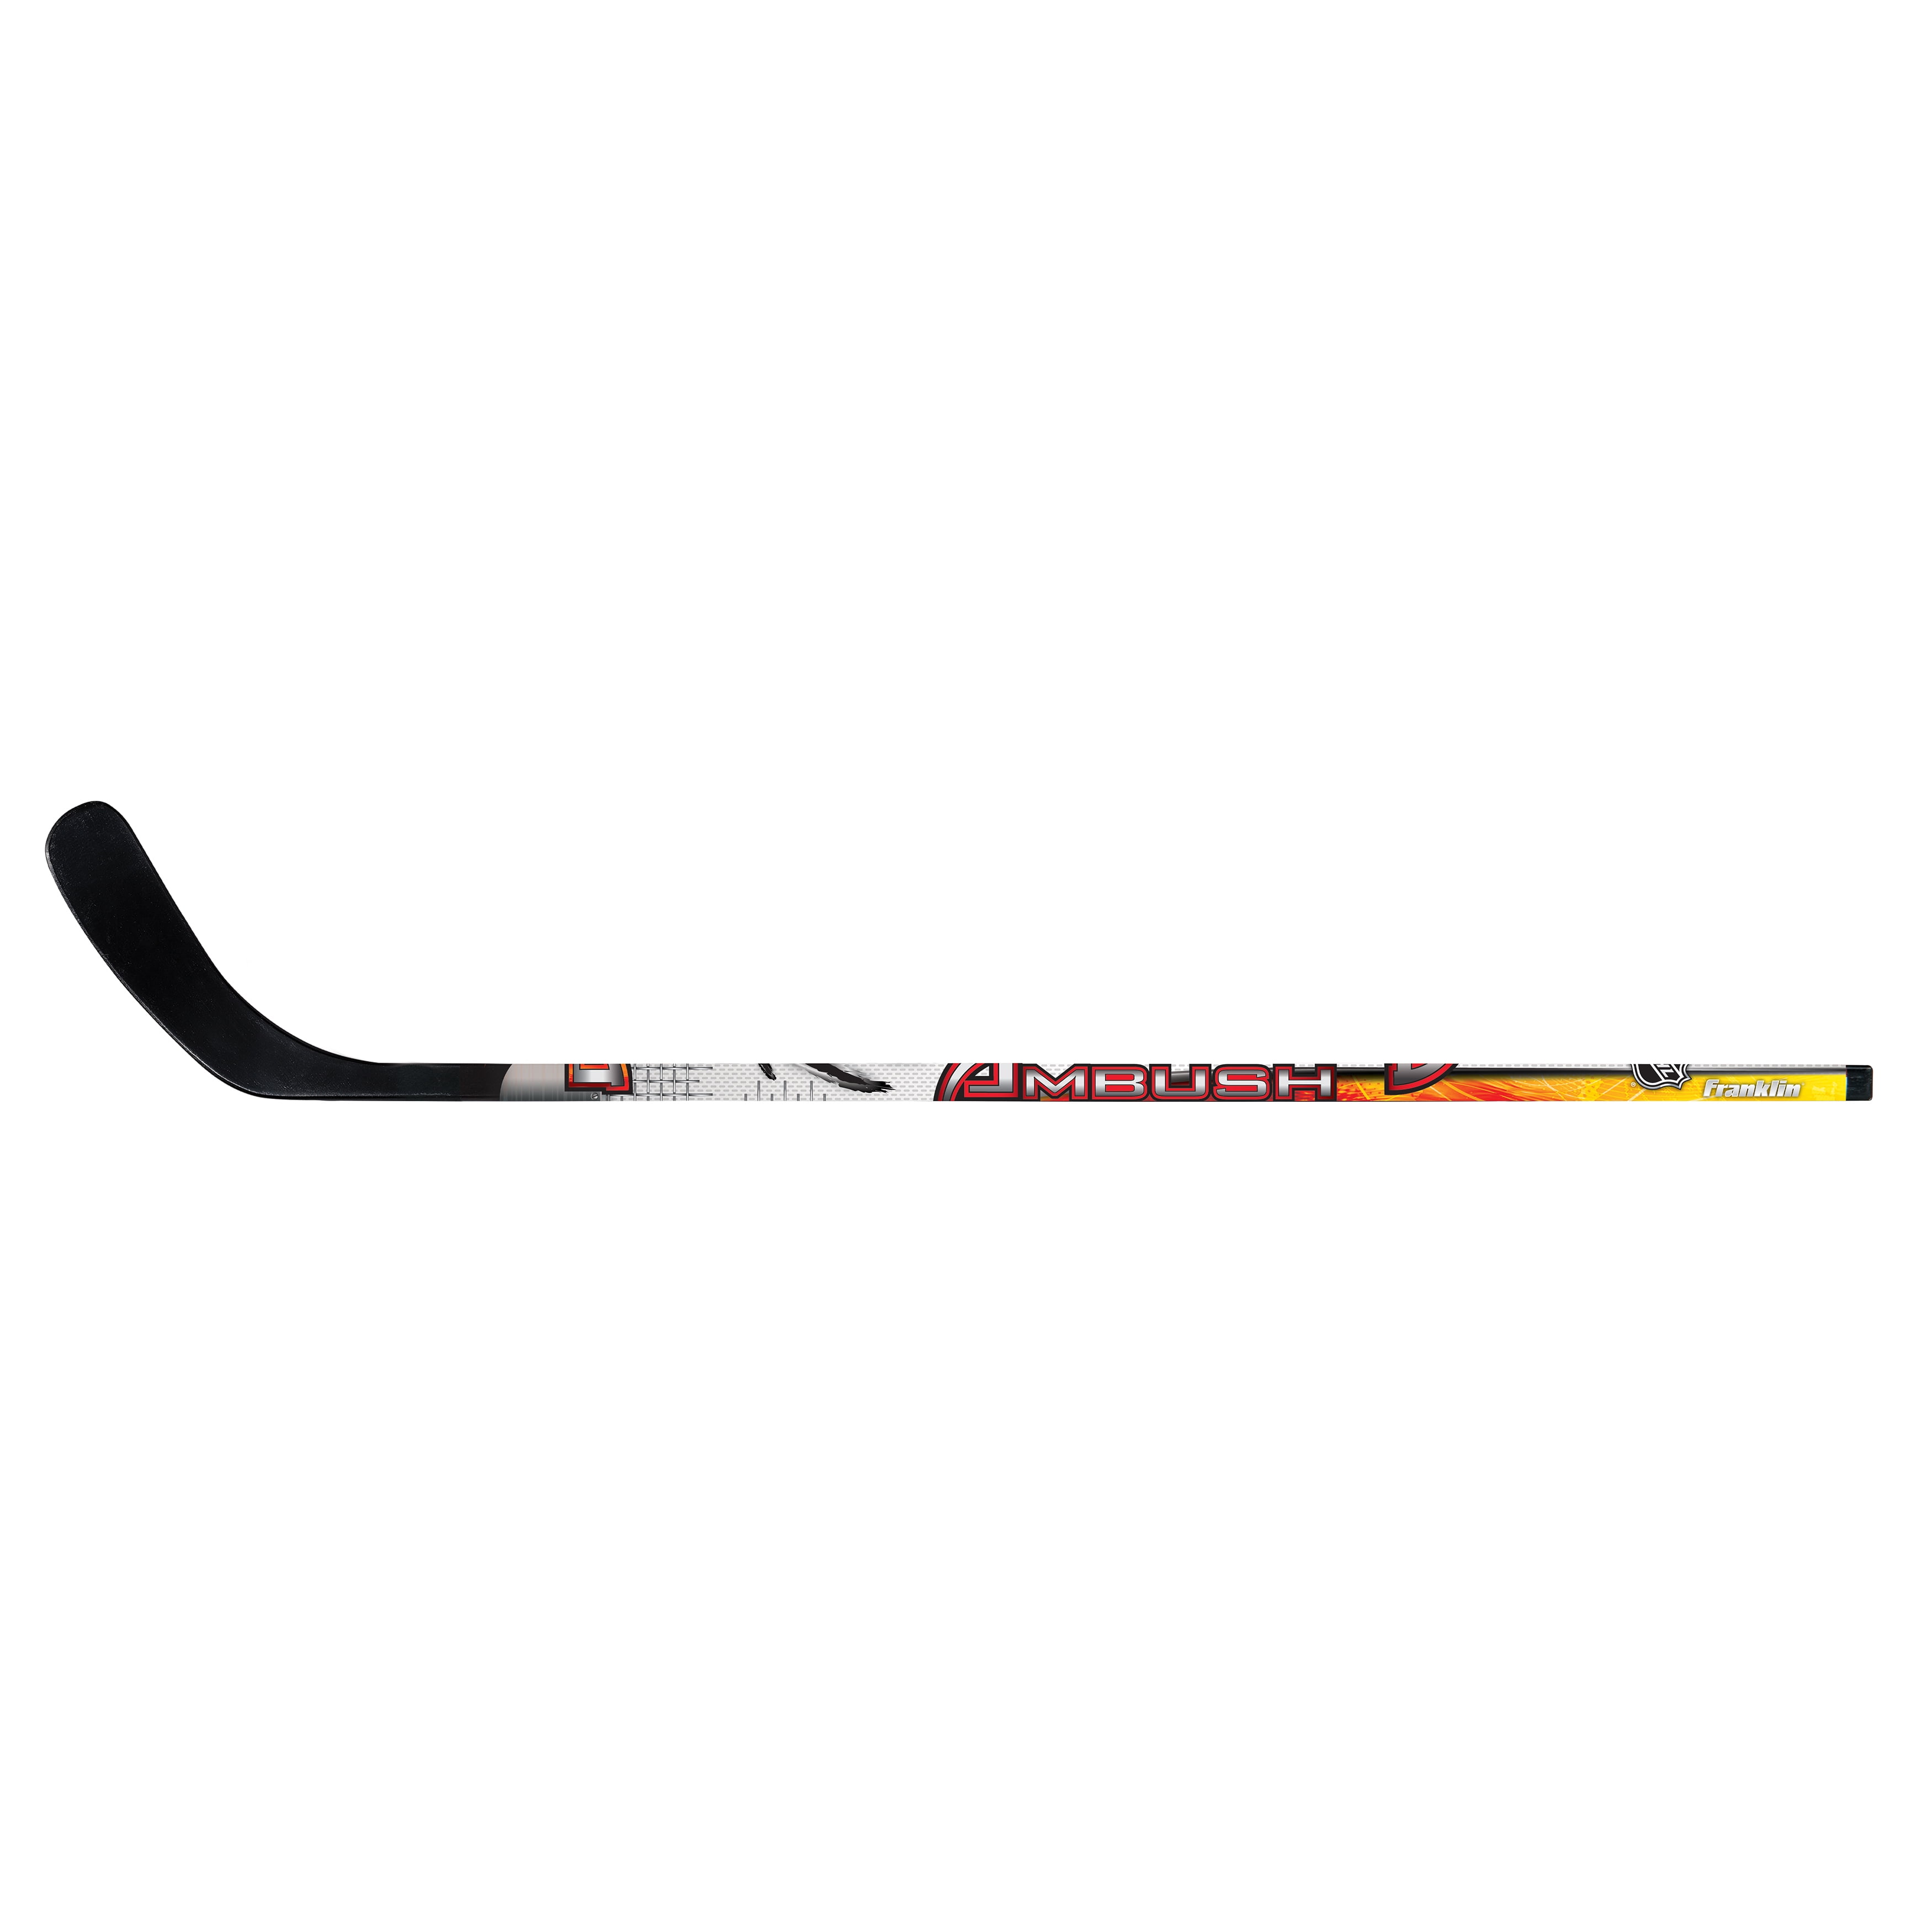 for the price of one Details about   Franklin Shot Zone Replacement Hockey Blade Black 2 